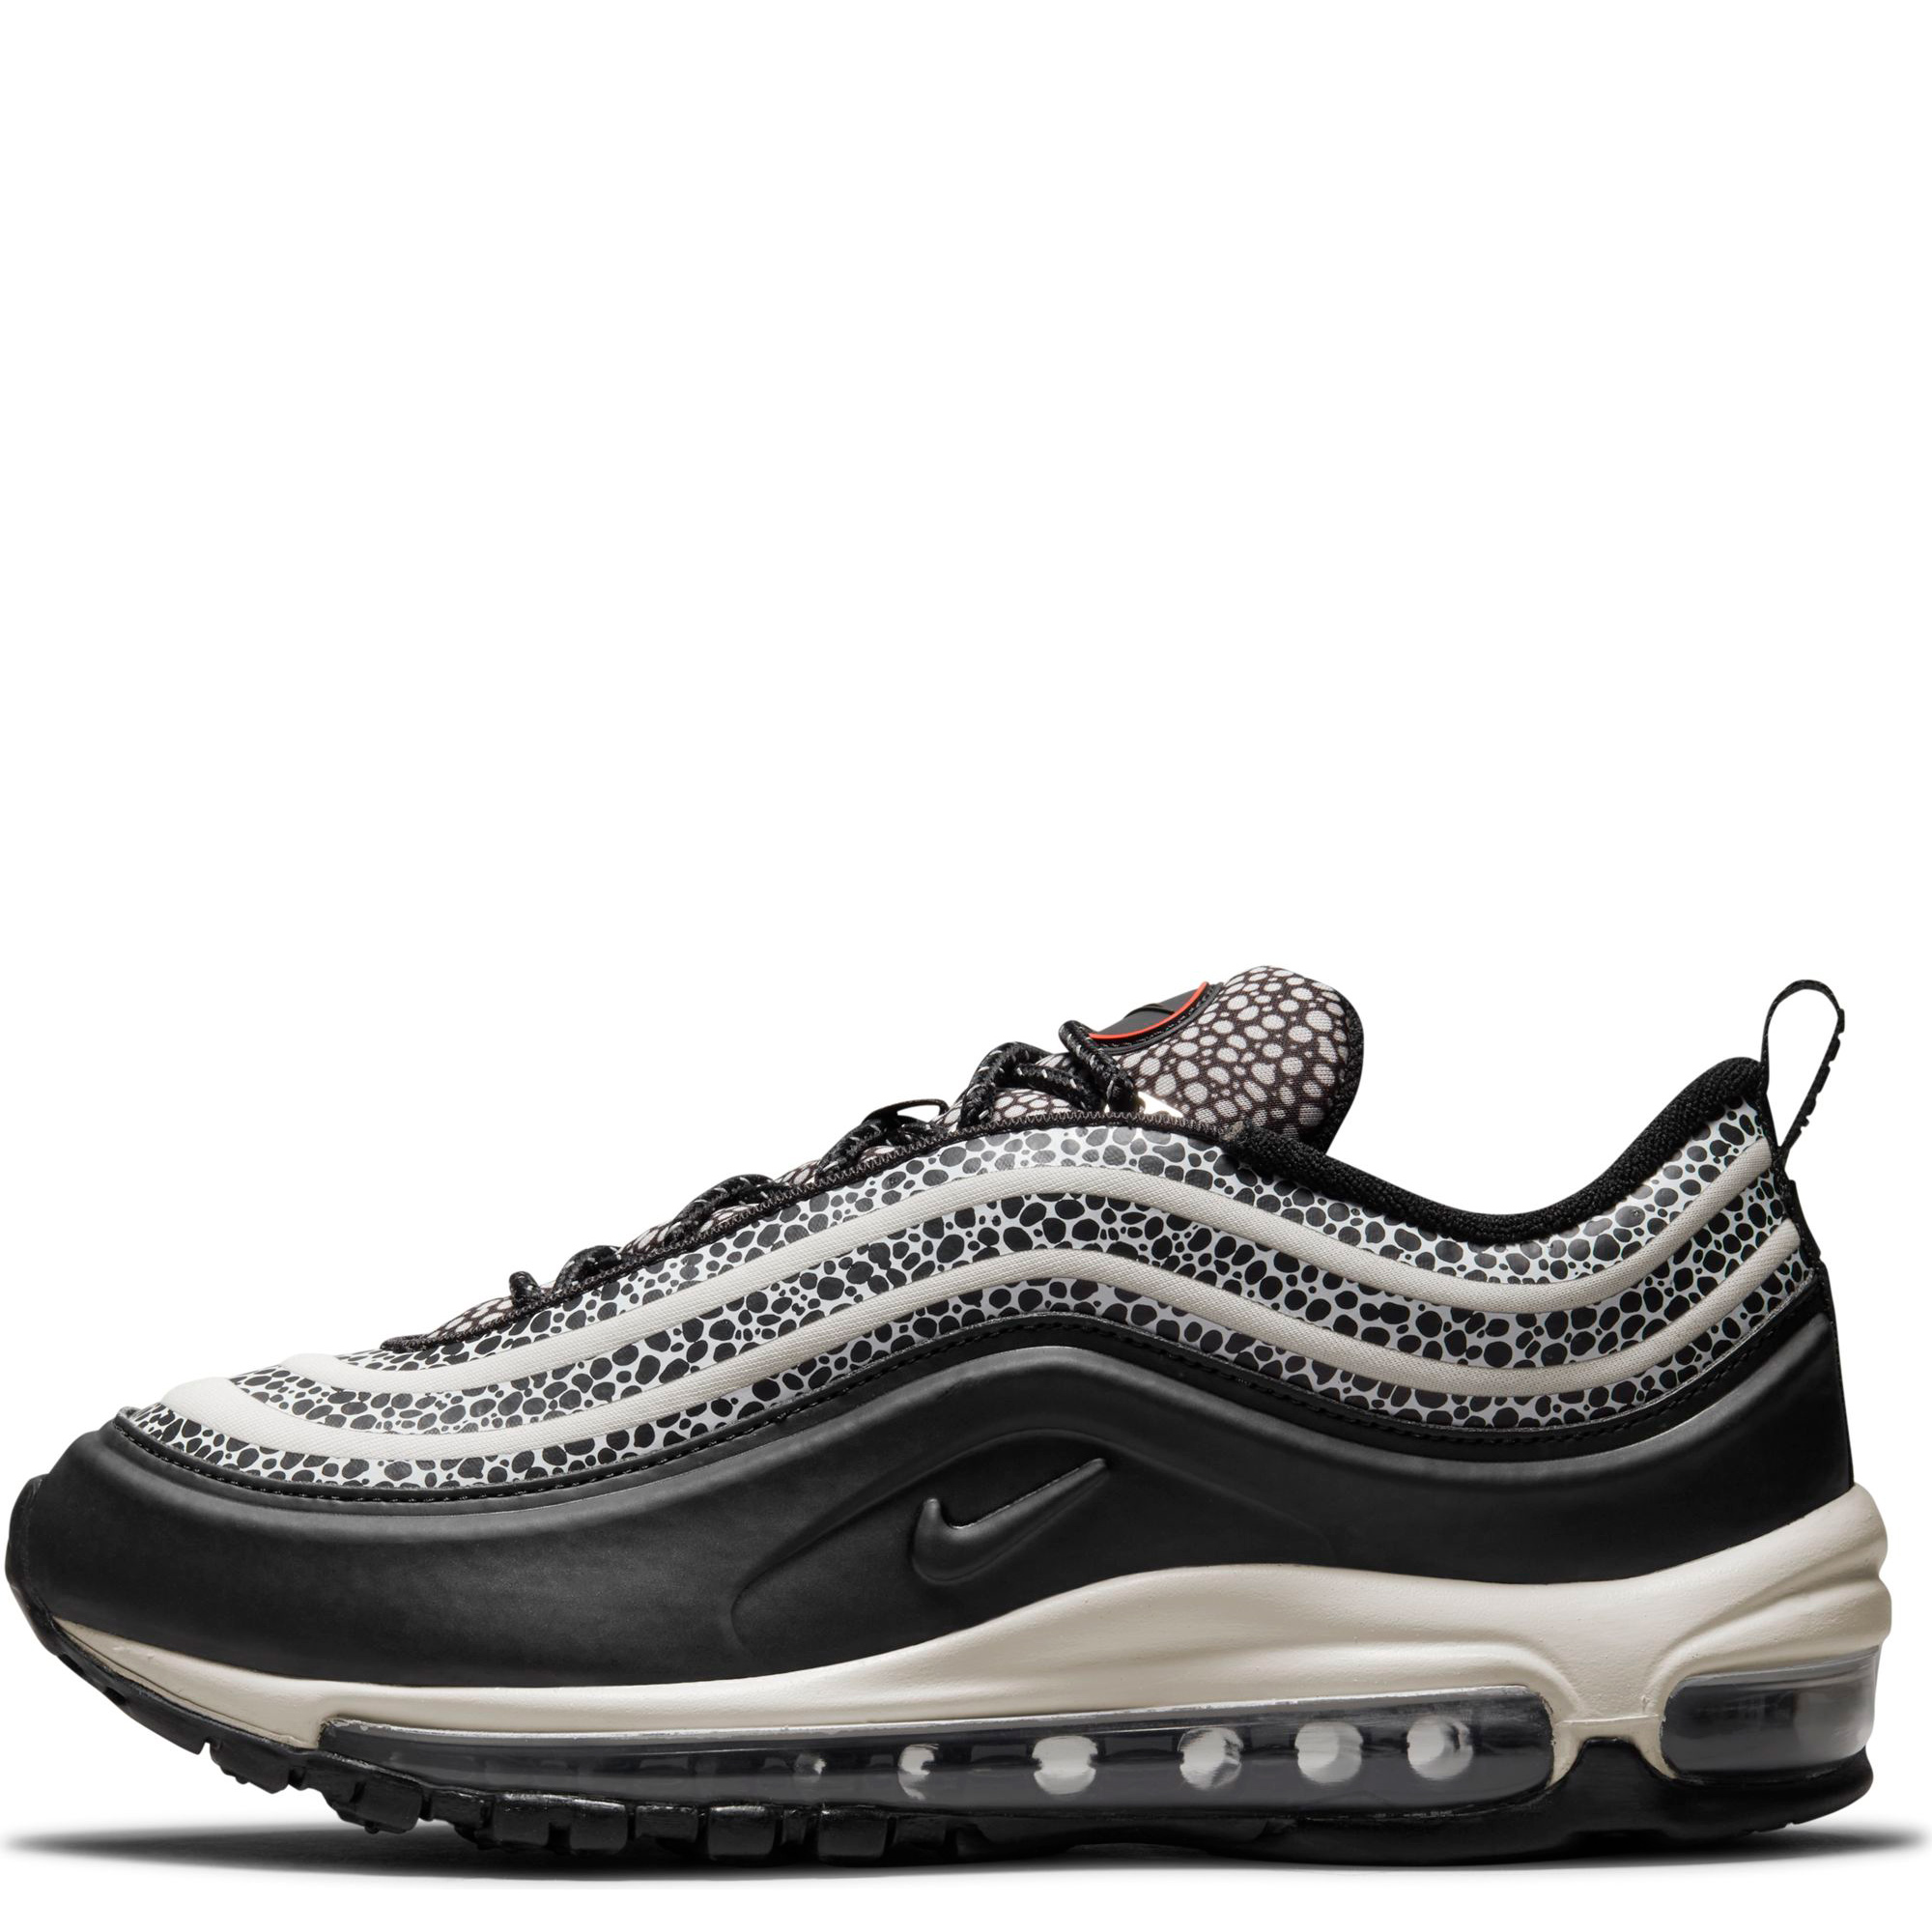 air max 97 donna grige